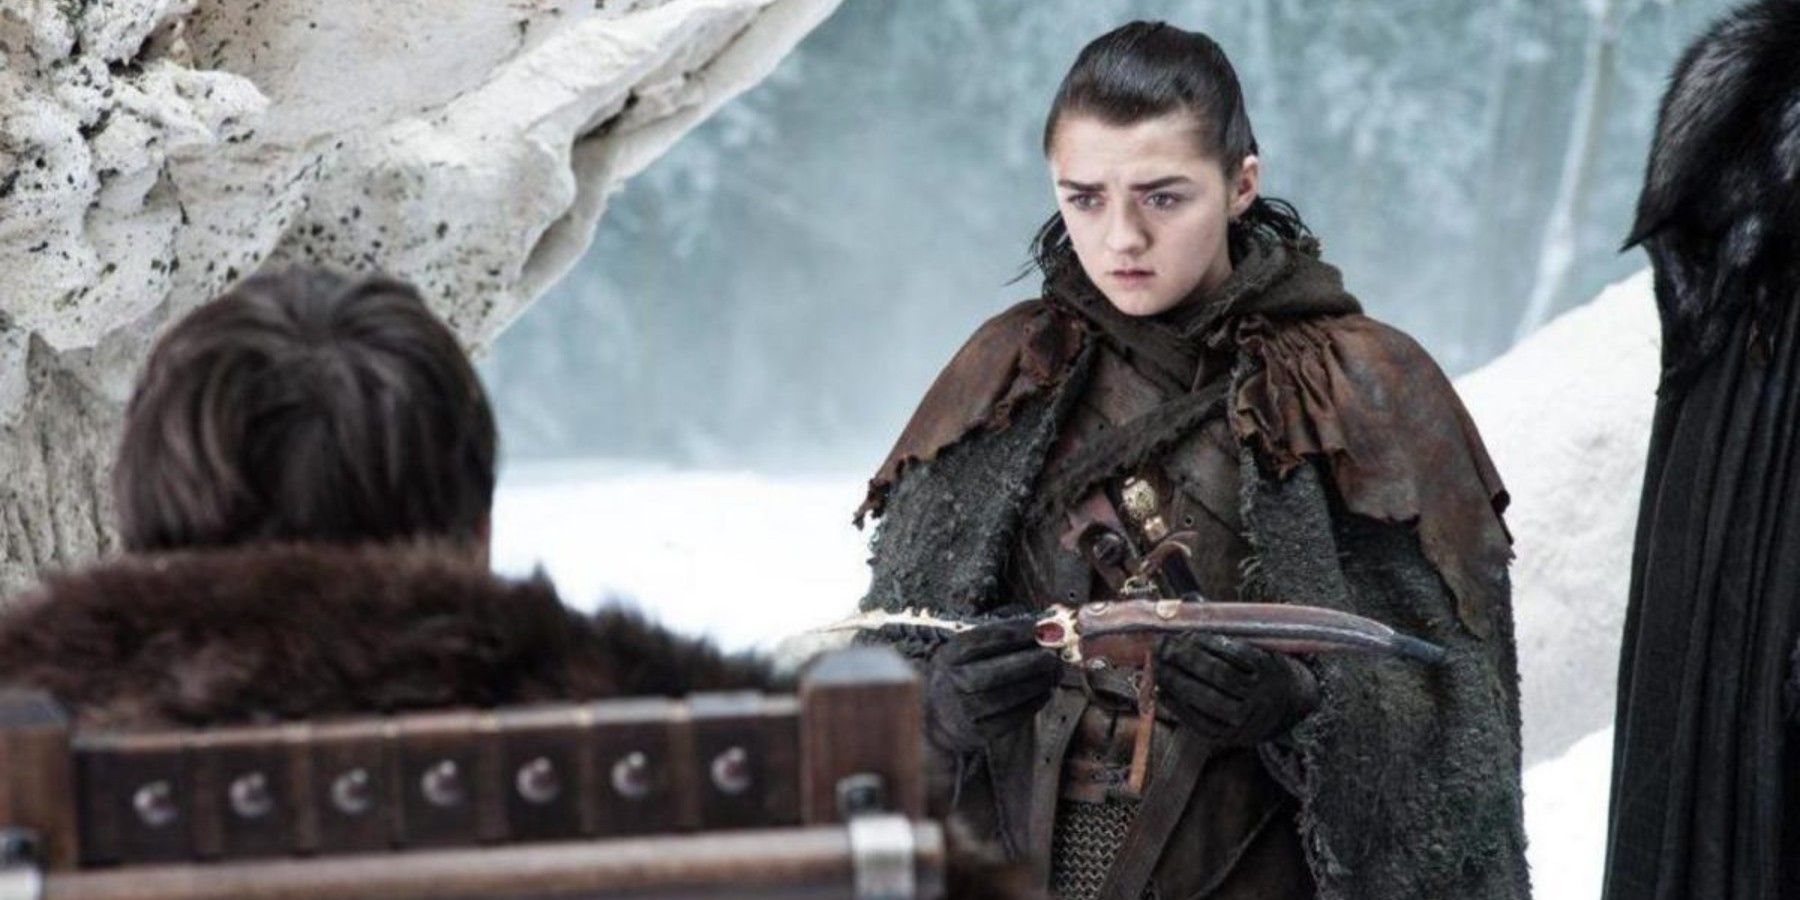 Bran gives Arya the dagger in Game of Thrones